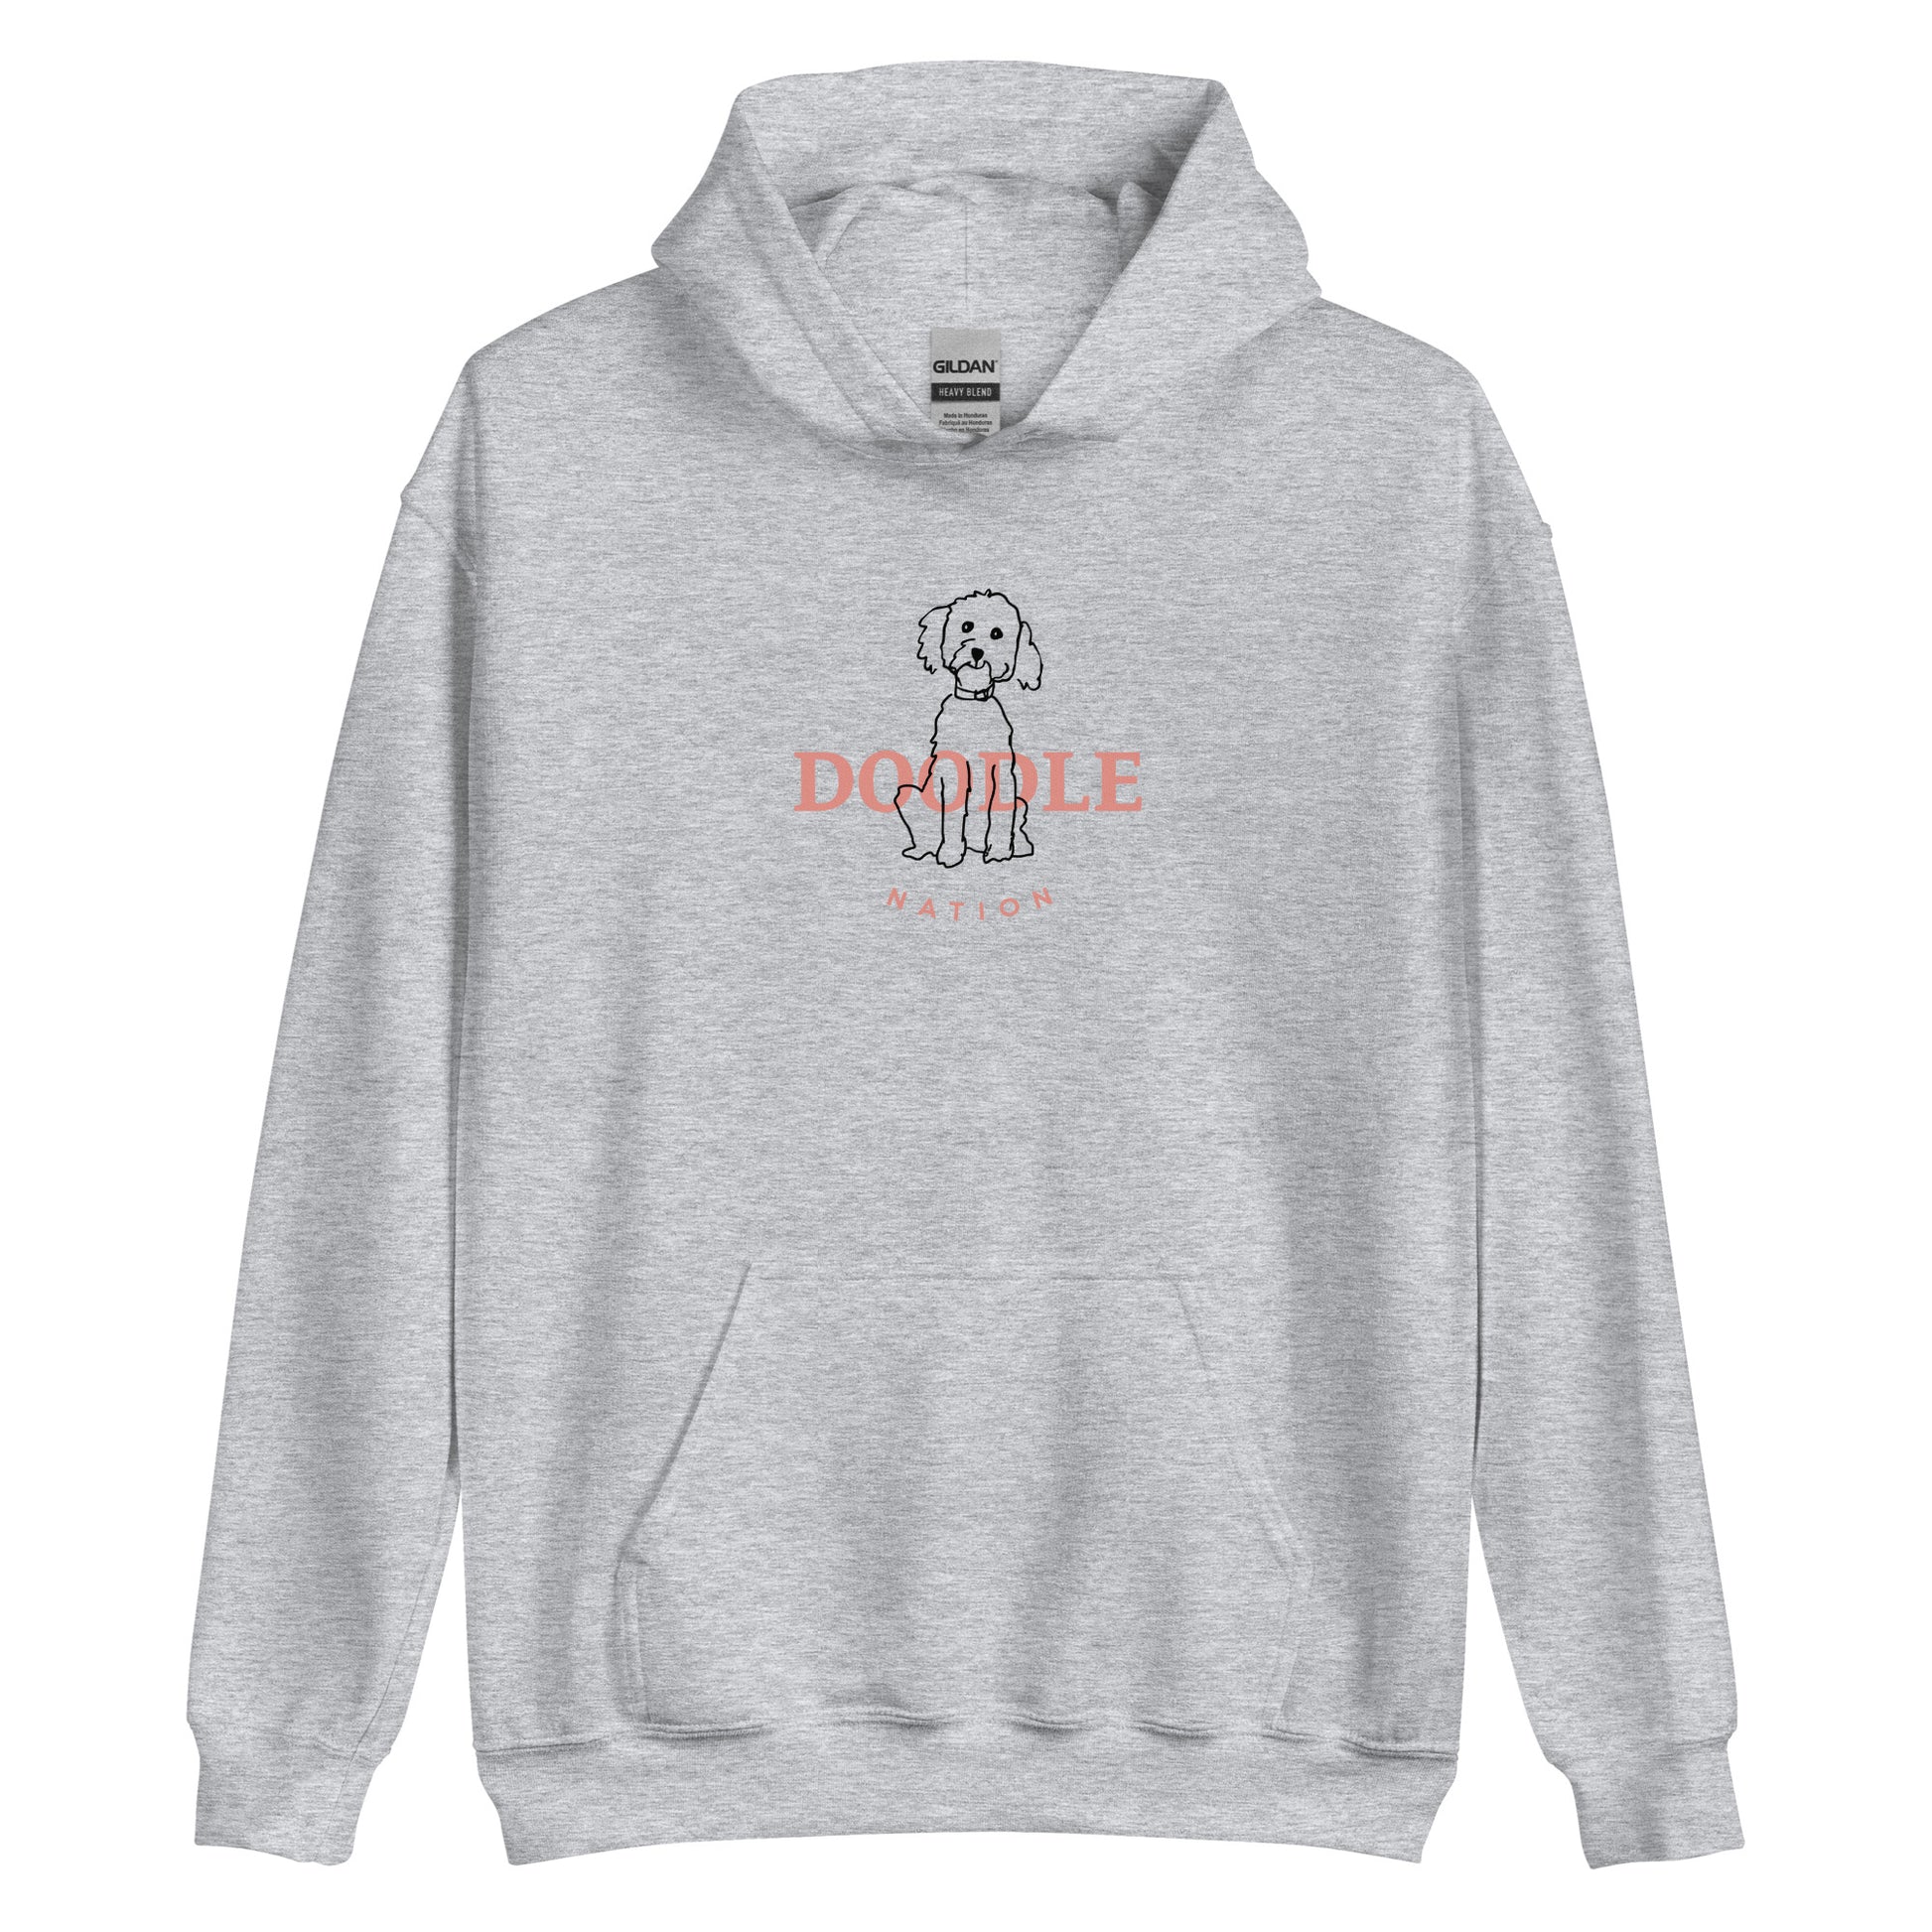 Goldendoodle hoodie with Goldendoodle and words "Doodle Nation" in sport grey color